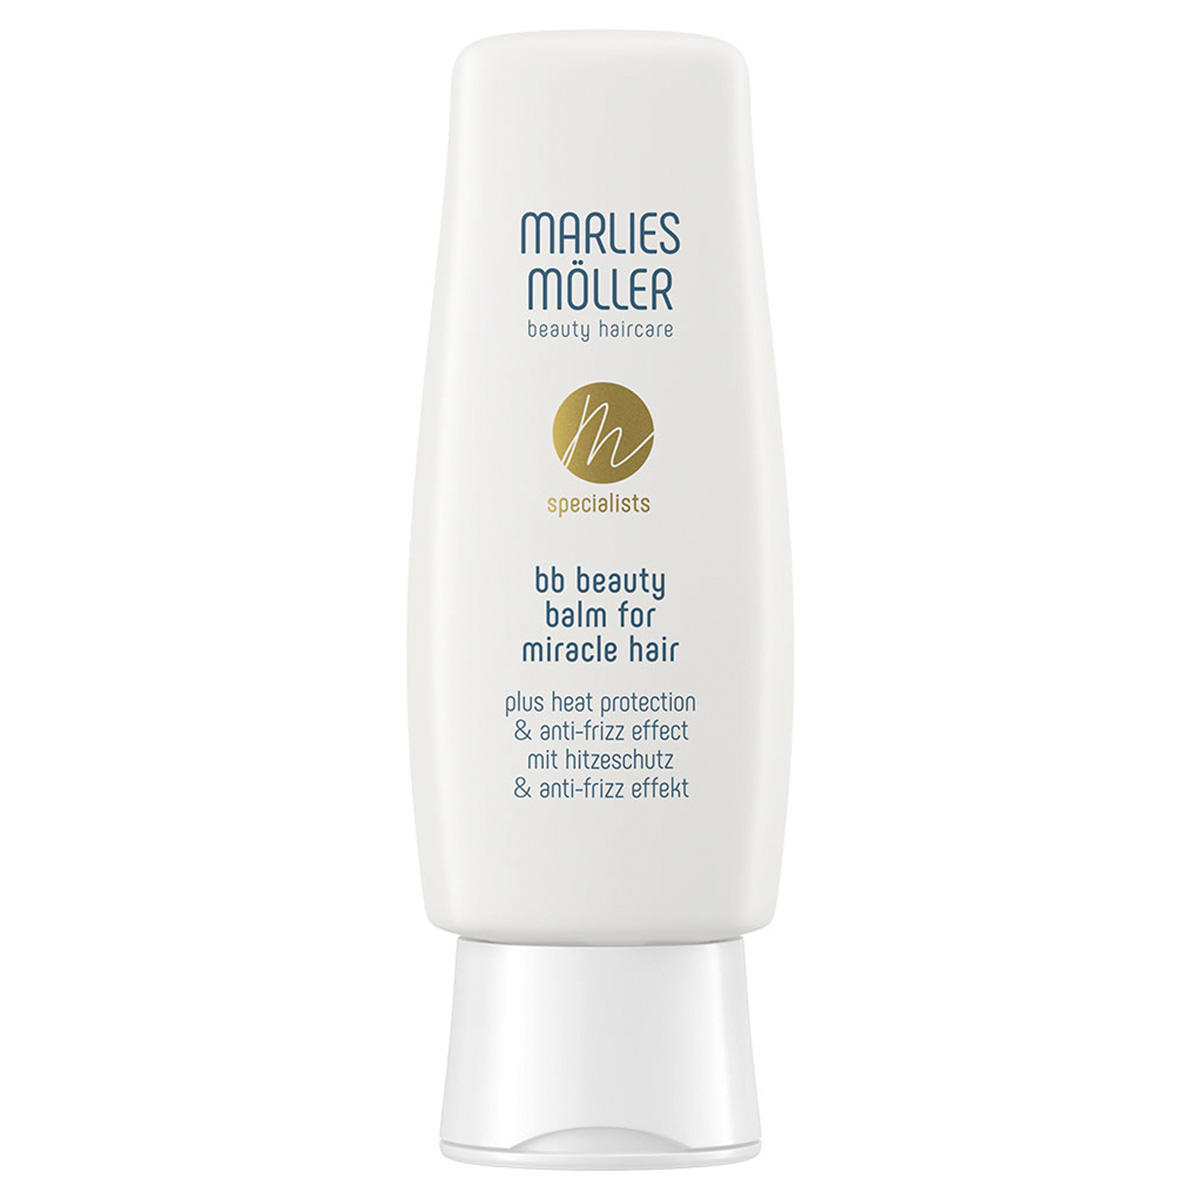 Marlies Möller Specialists BB Beauty Balm for Miracle Hair 100 ml - 1